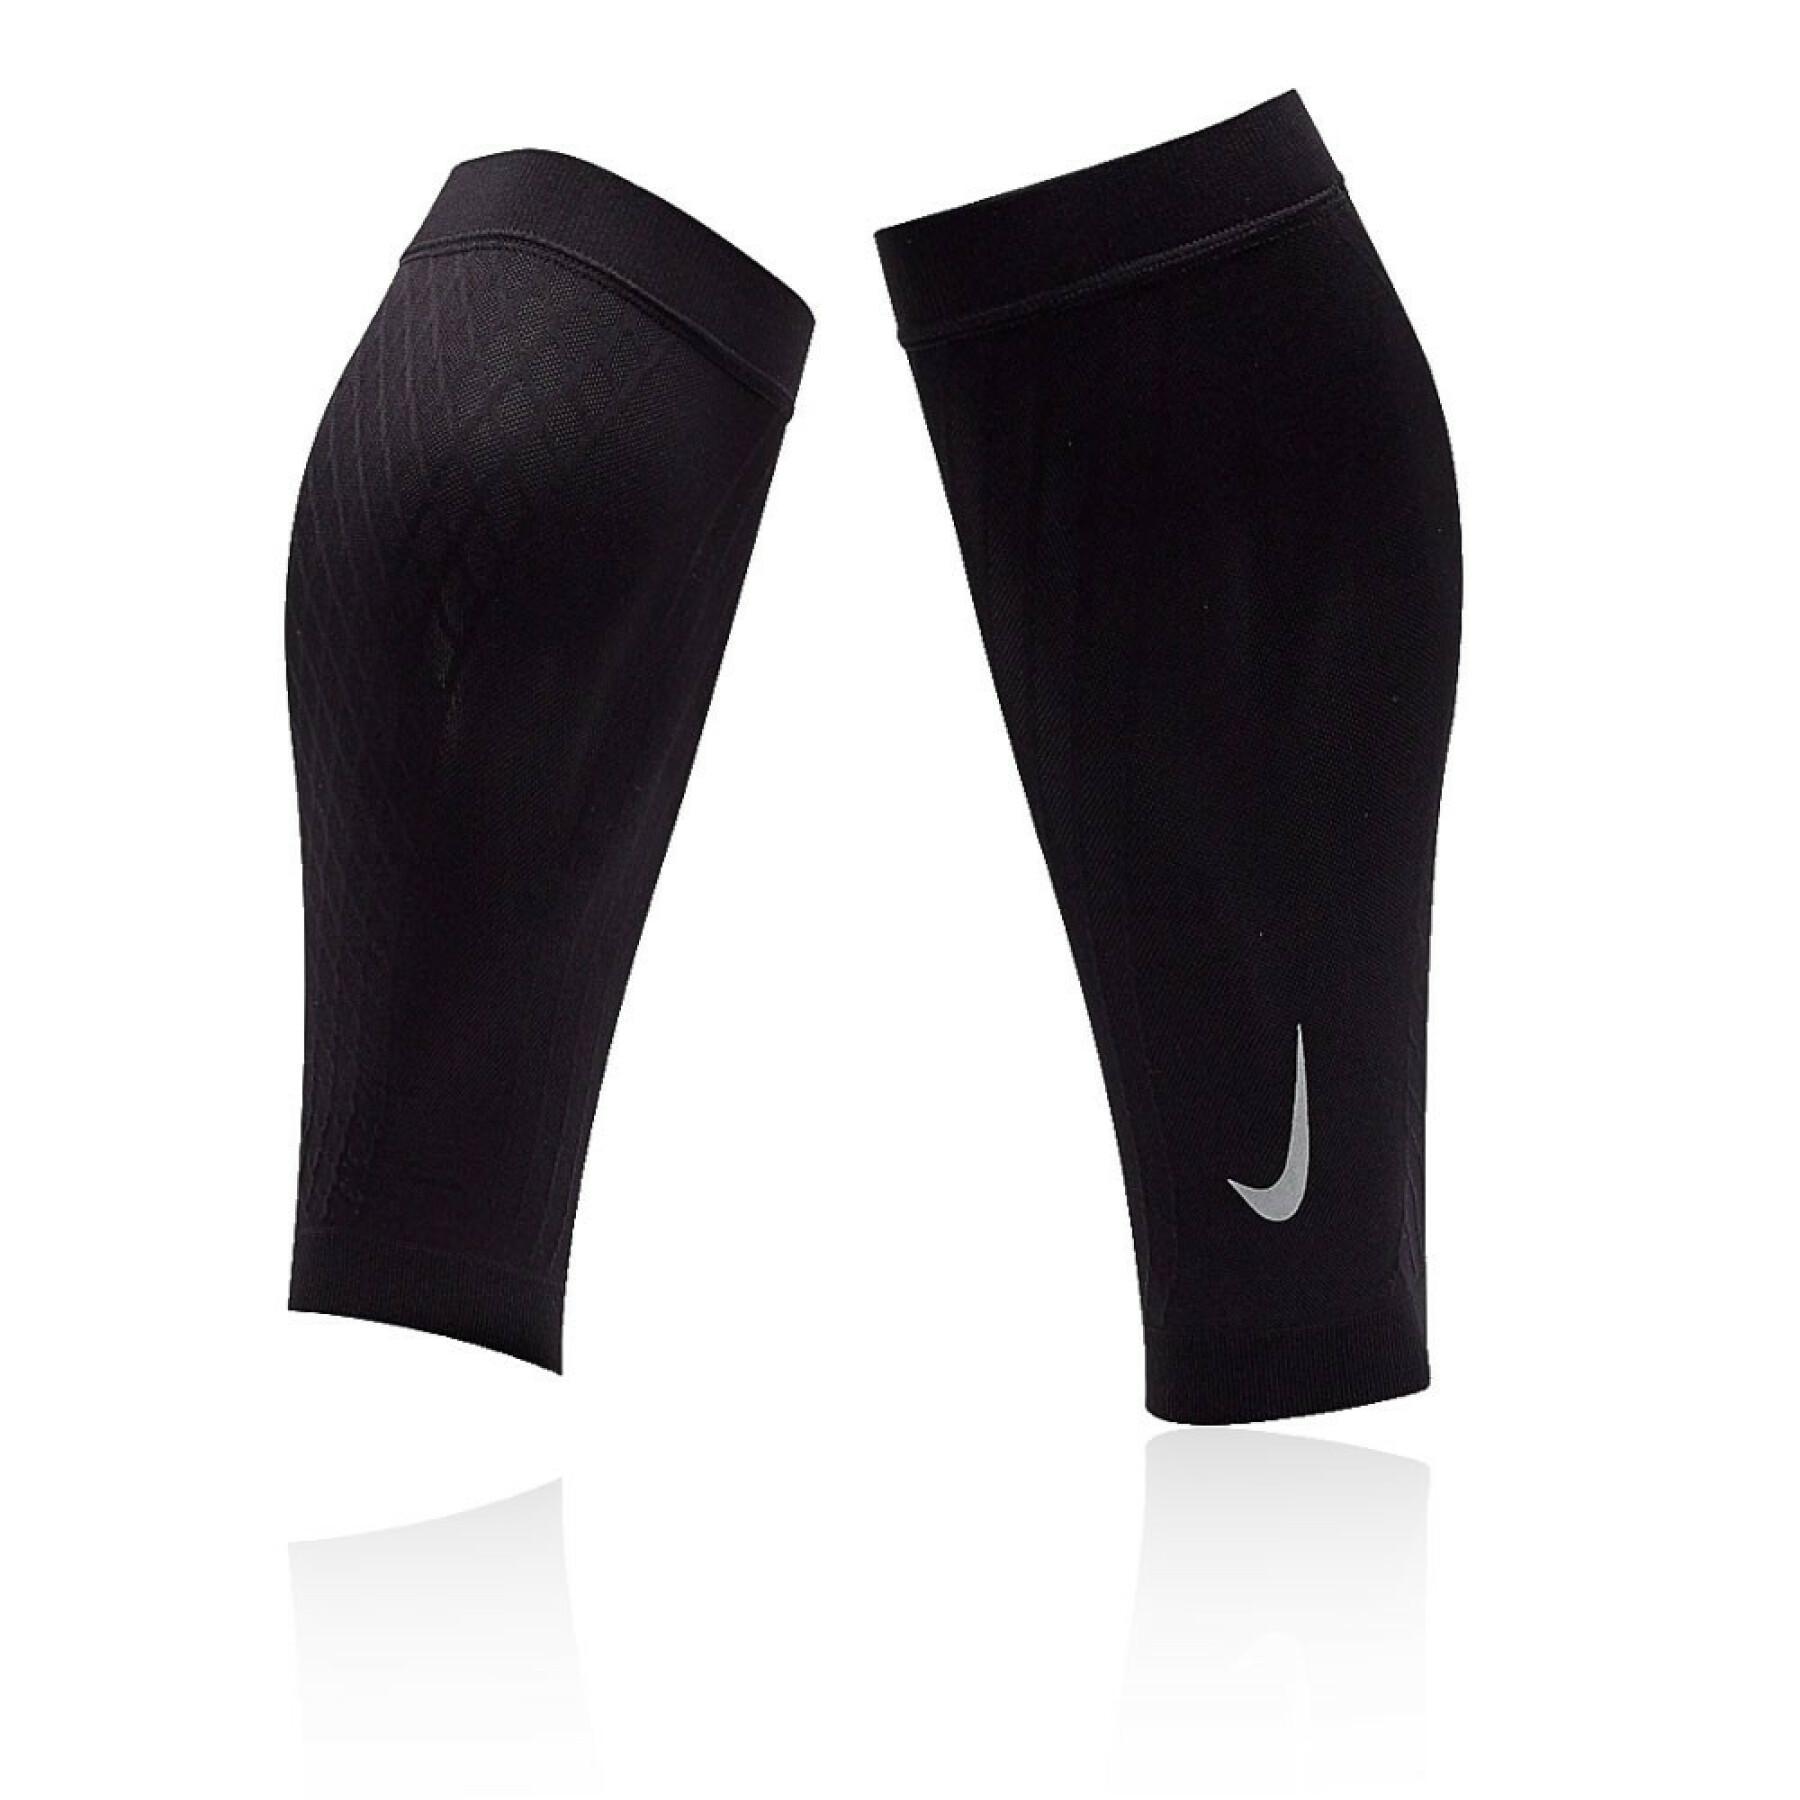 Compression sleeve compression legs Nike Zoned Support